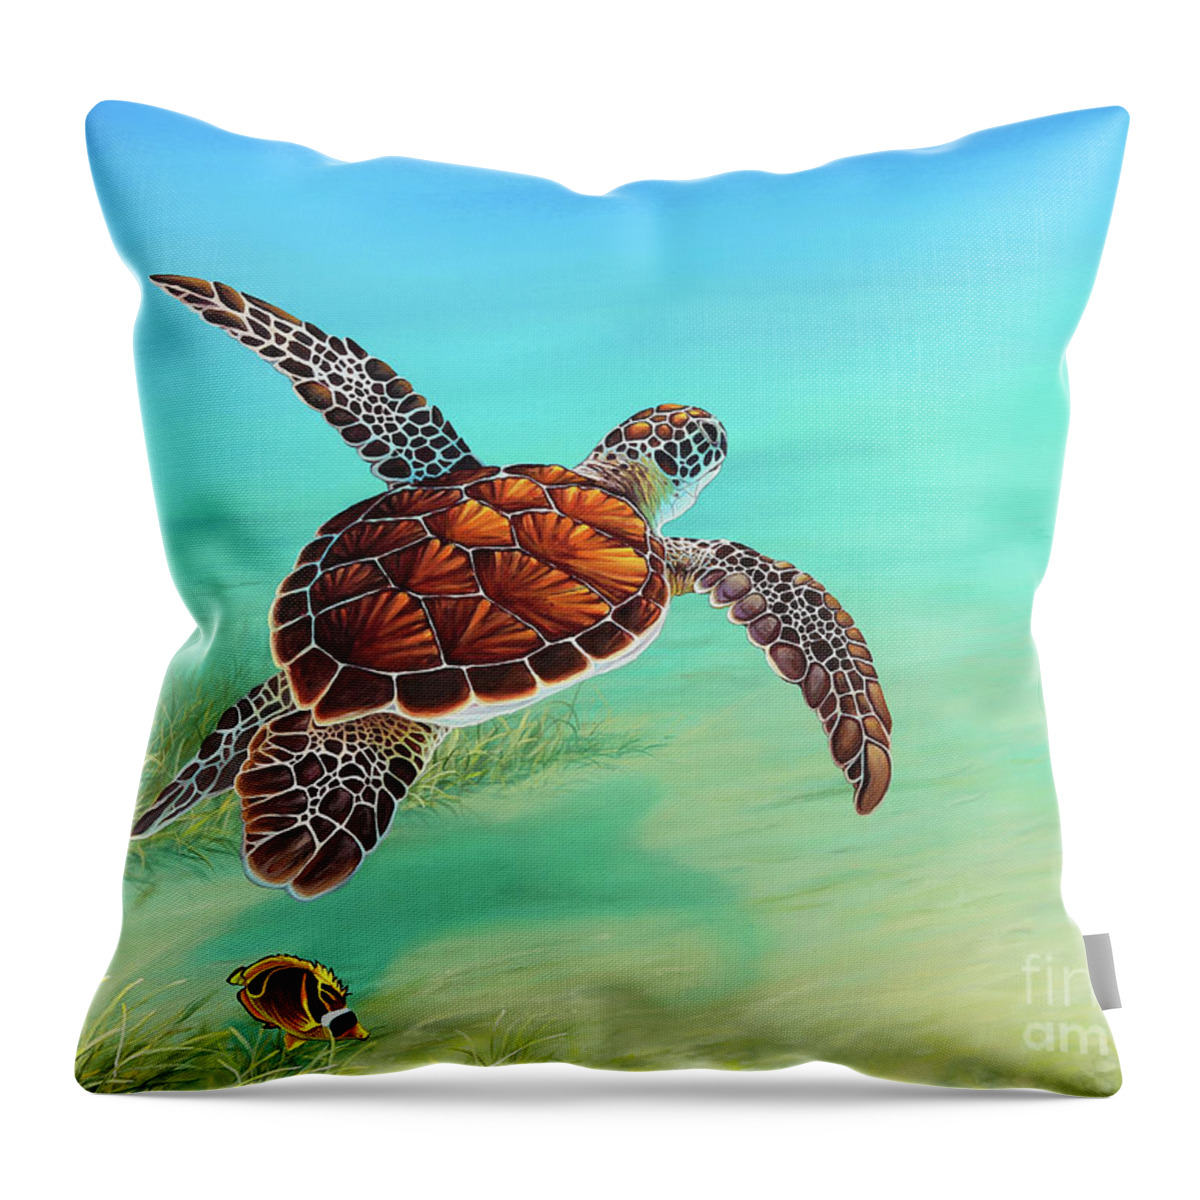 Sea Turtle Throw Pillow featuring the painting Gliding Through the Sea by Joe Mandrick